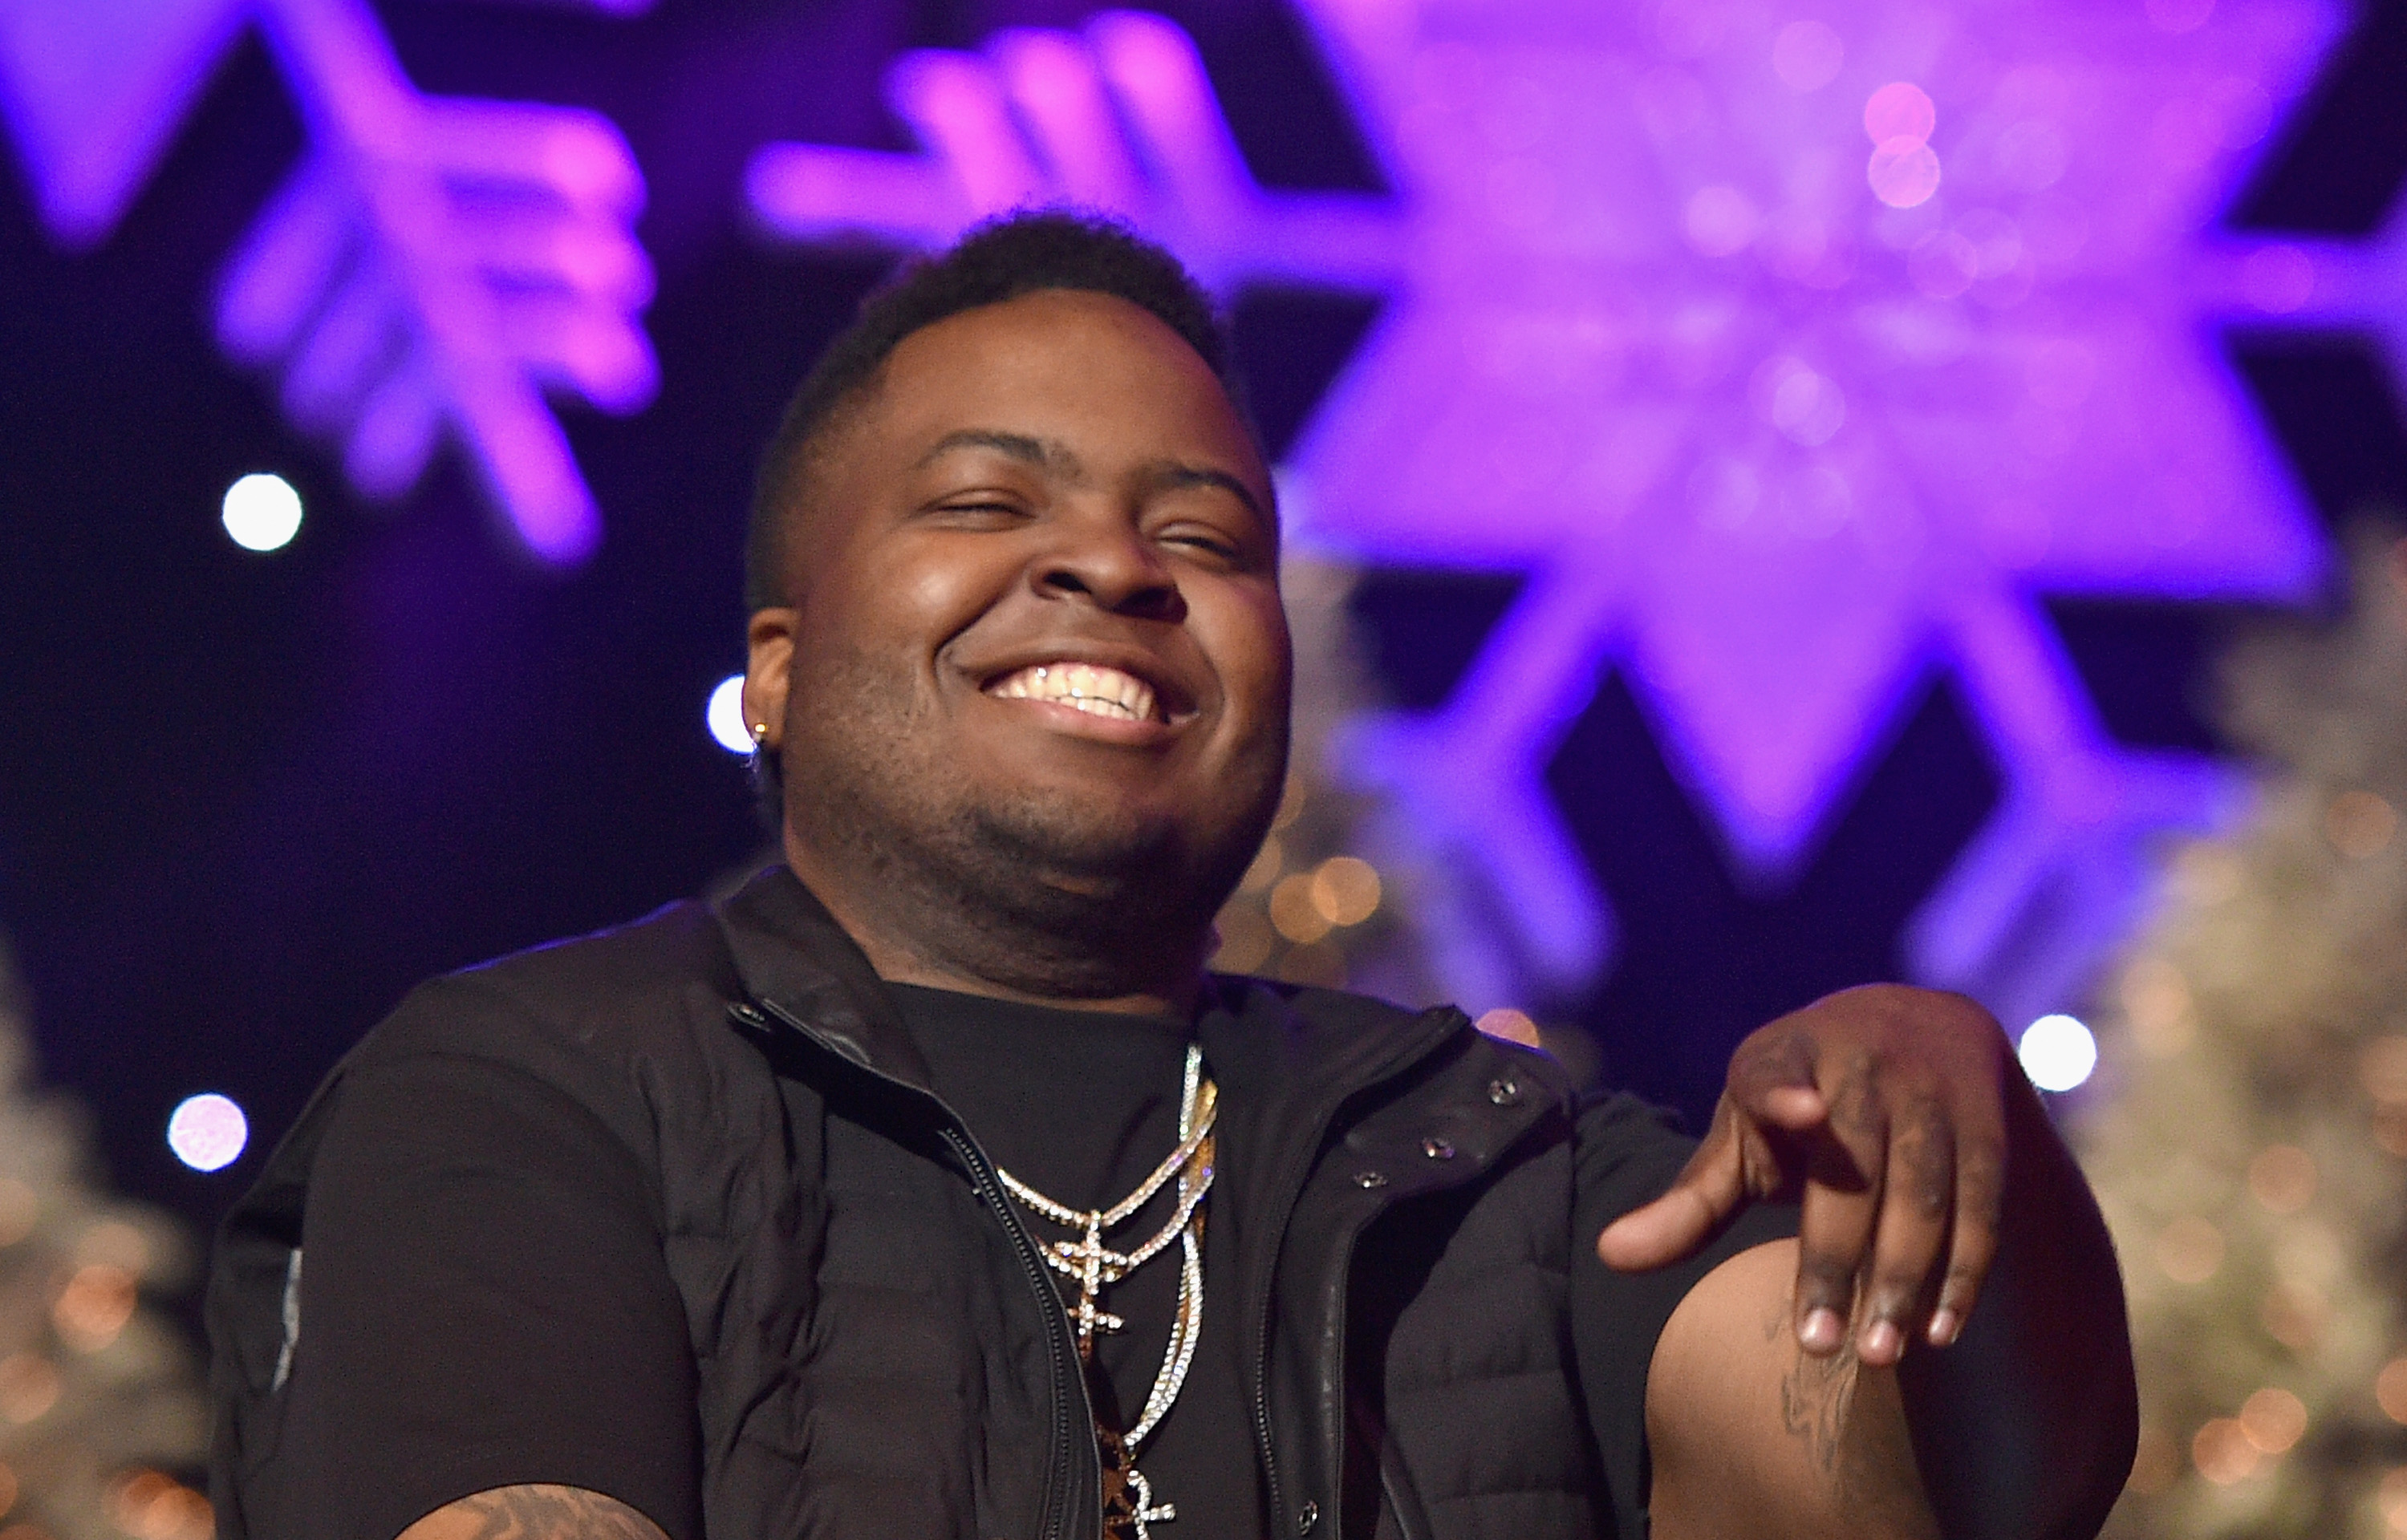 Sean Kingston Once Spent $1M On A Watch — But Here's How His Spending Habits Highlight The Importance Of Wealth Management